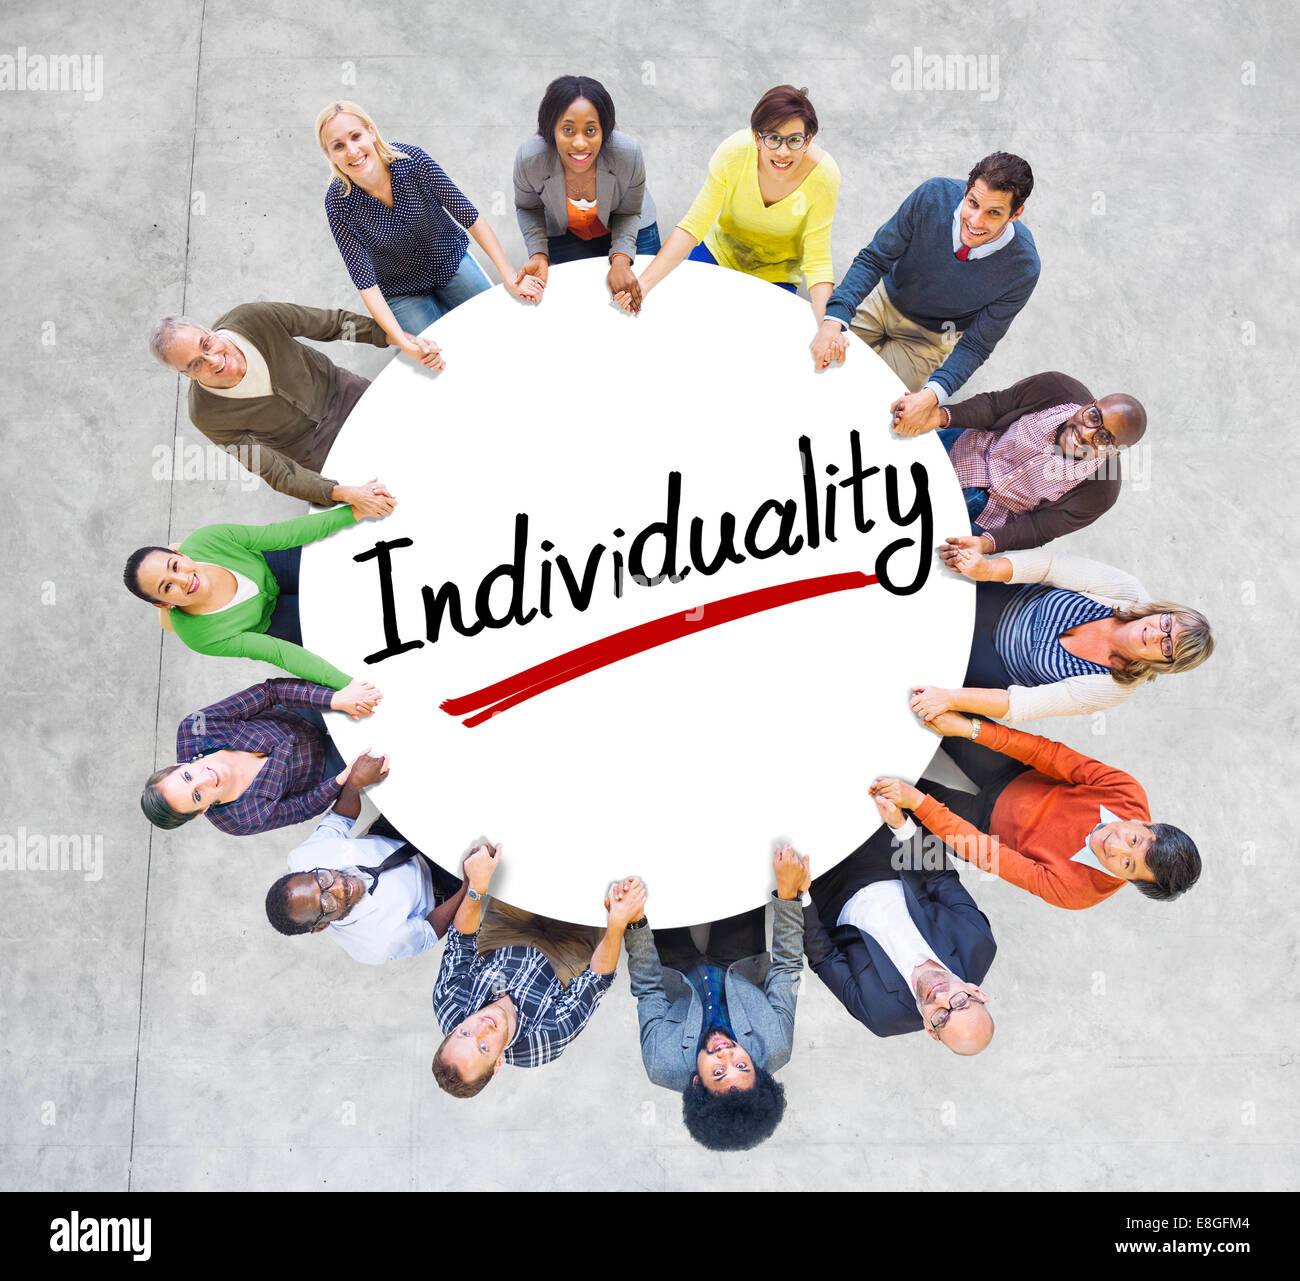 Aerial View of People and Individuality Concepts Stock Photo